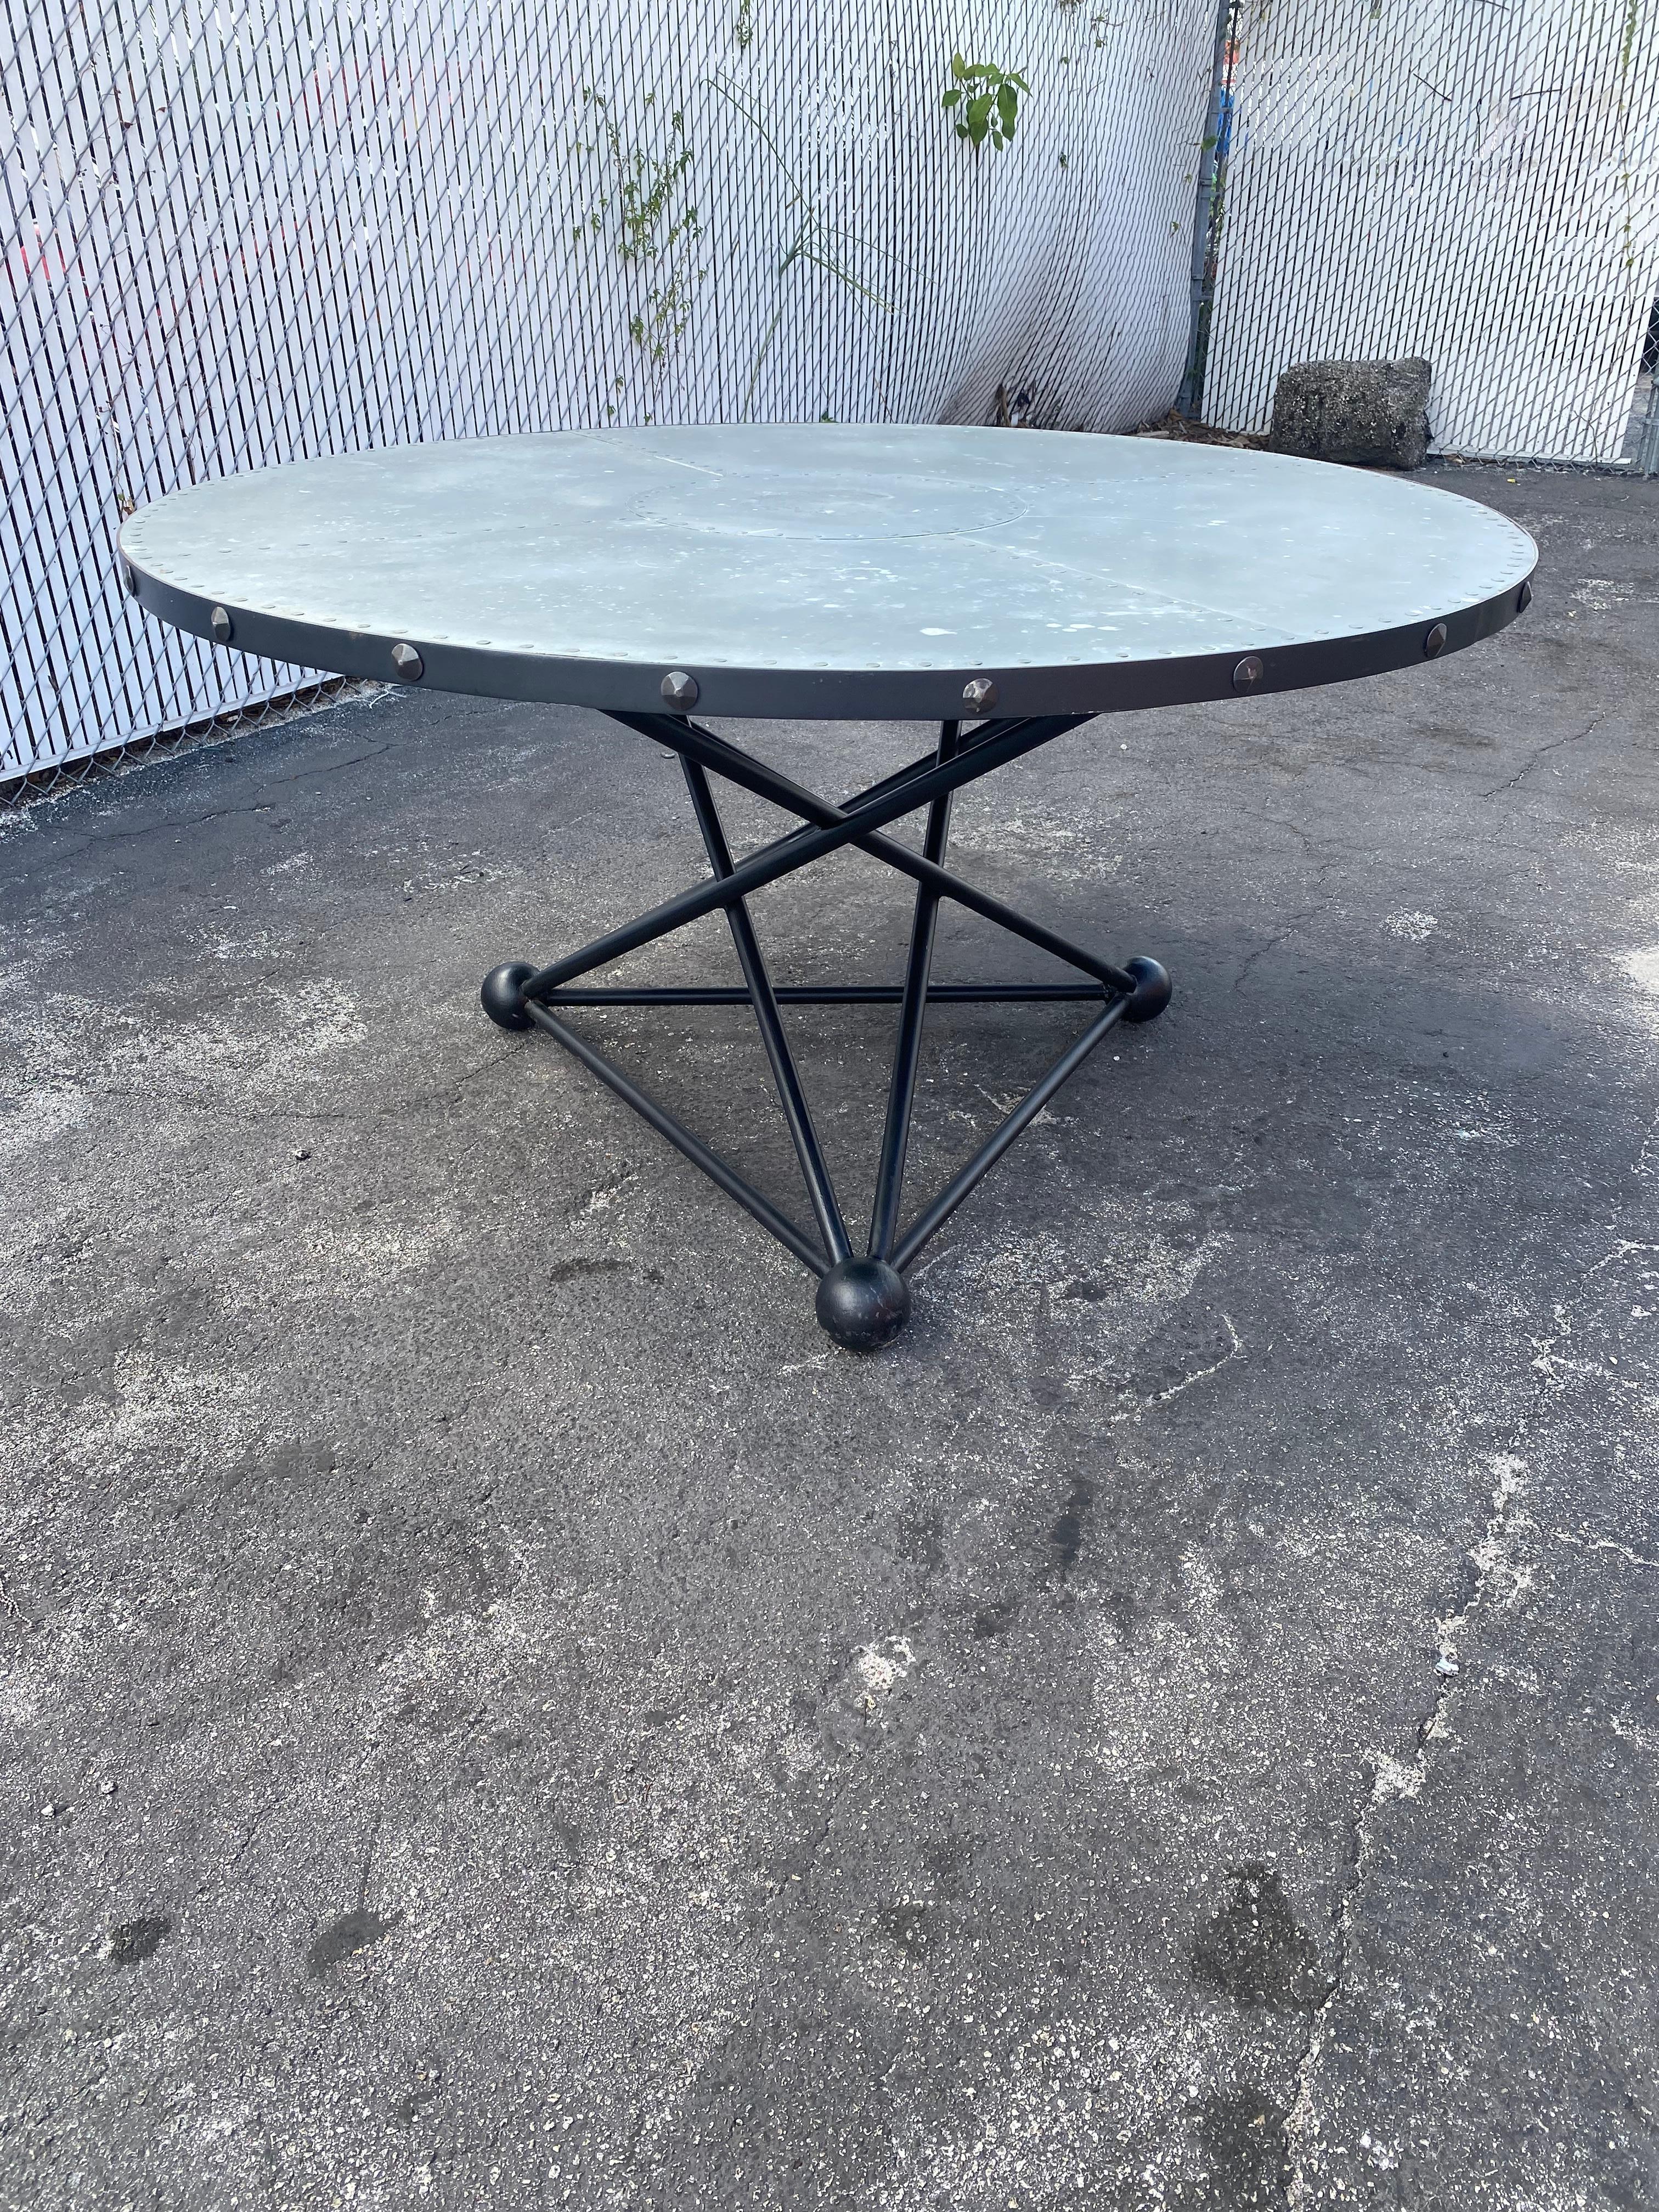 American 1980s Industrial Geometrical Sculptural Steel Zinc Wood Round Dining Table For Sale